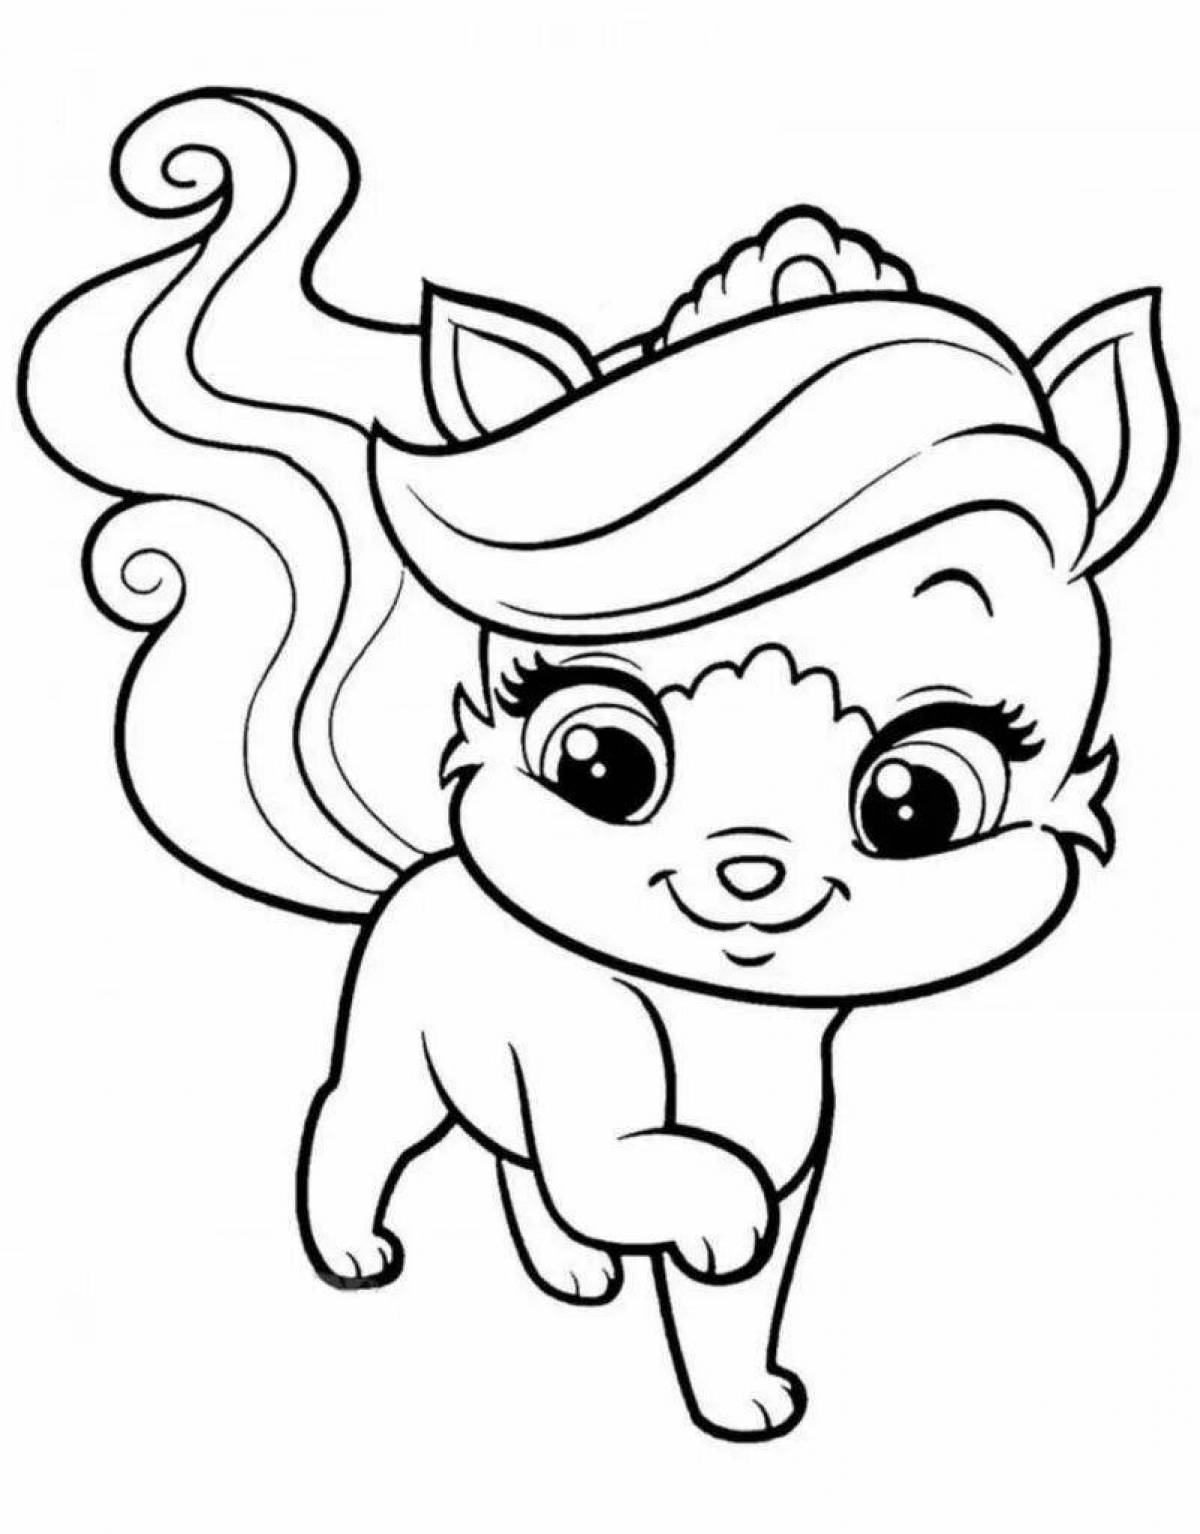 Coloring pages for children 5-6 years old for girls animals